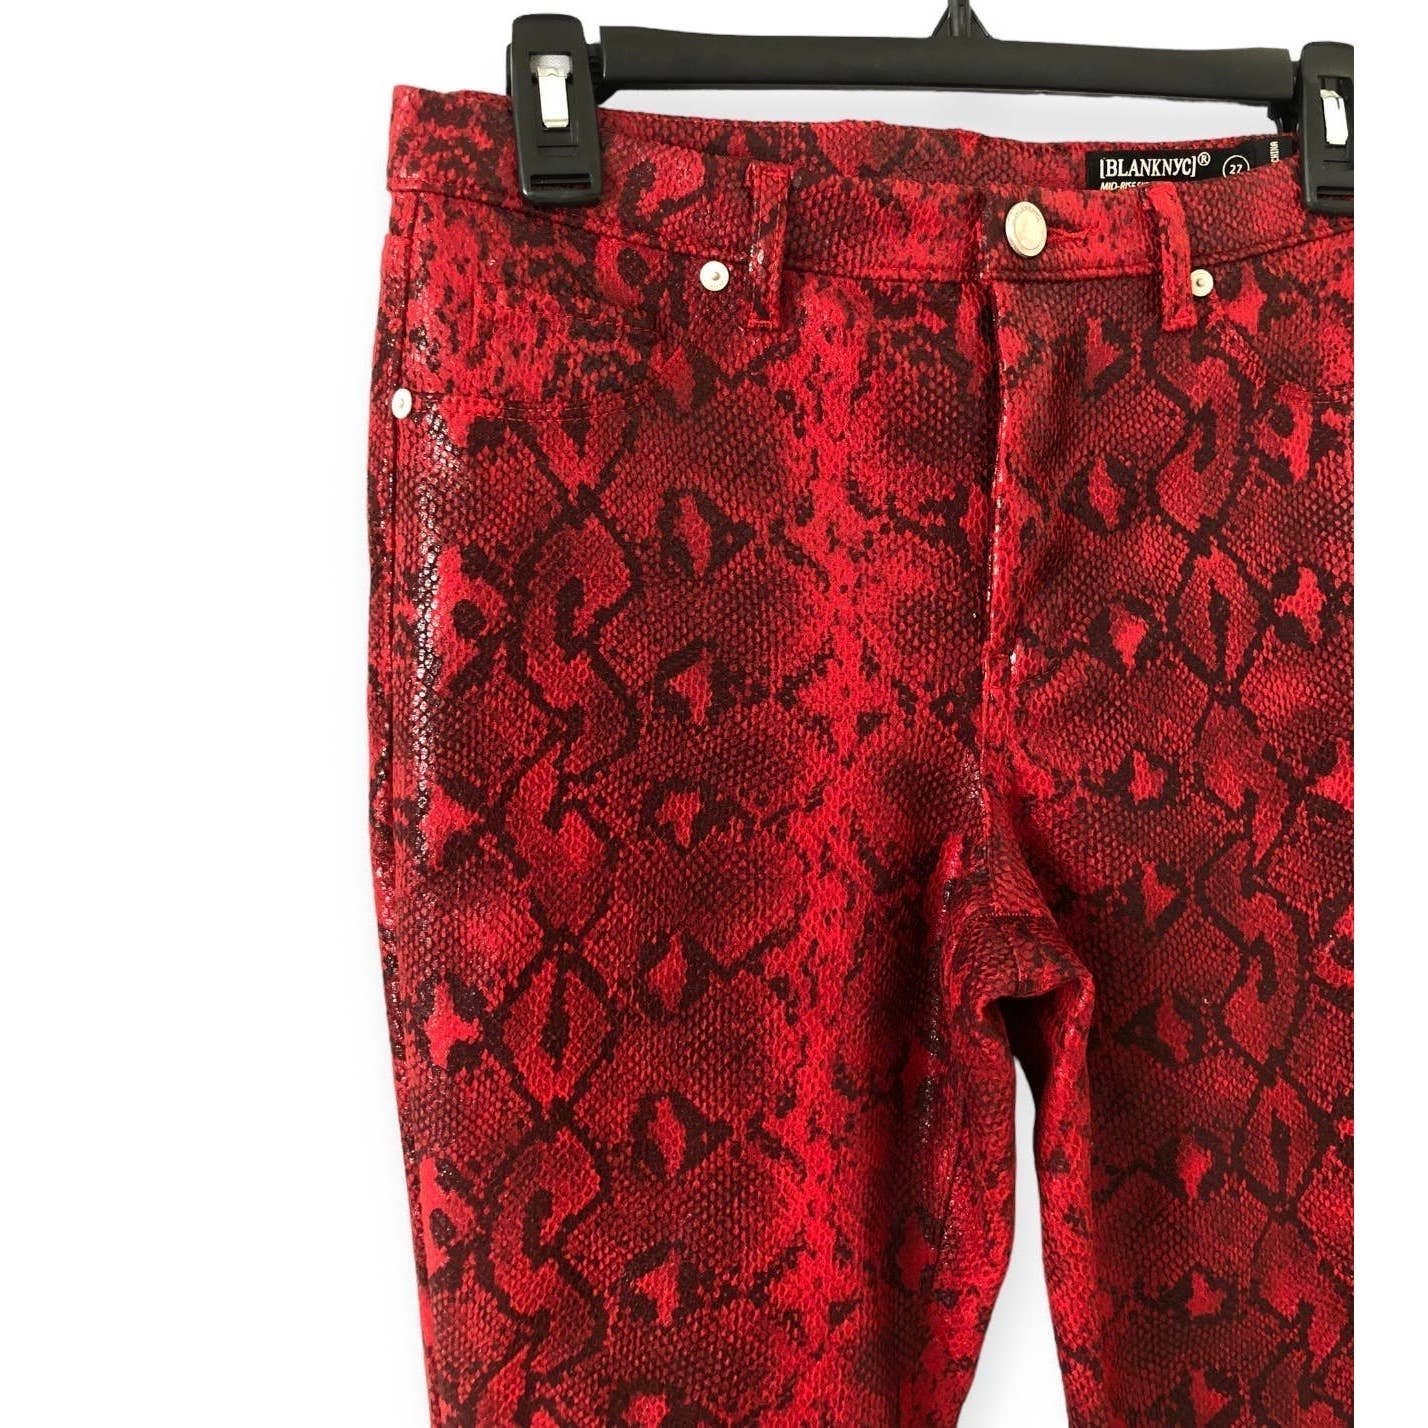 Custom BLANKNYC Red Snakeskin Faux Leather Chic Retro Pants Size 27 j3mM2CiVI all for you